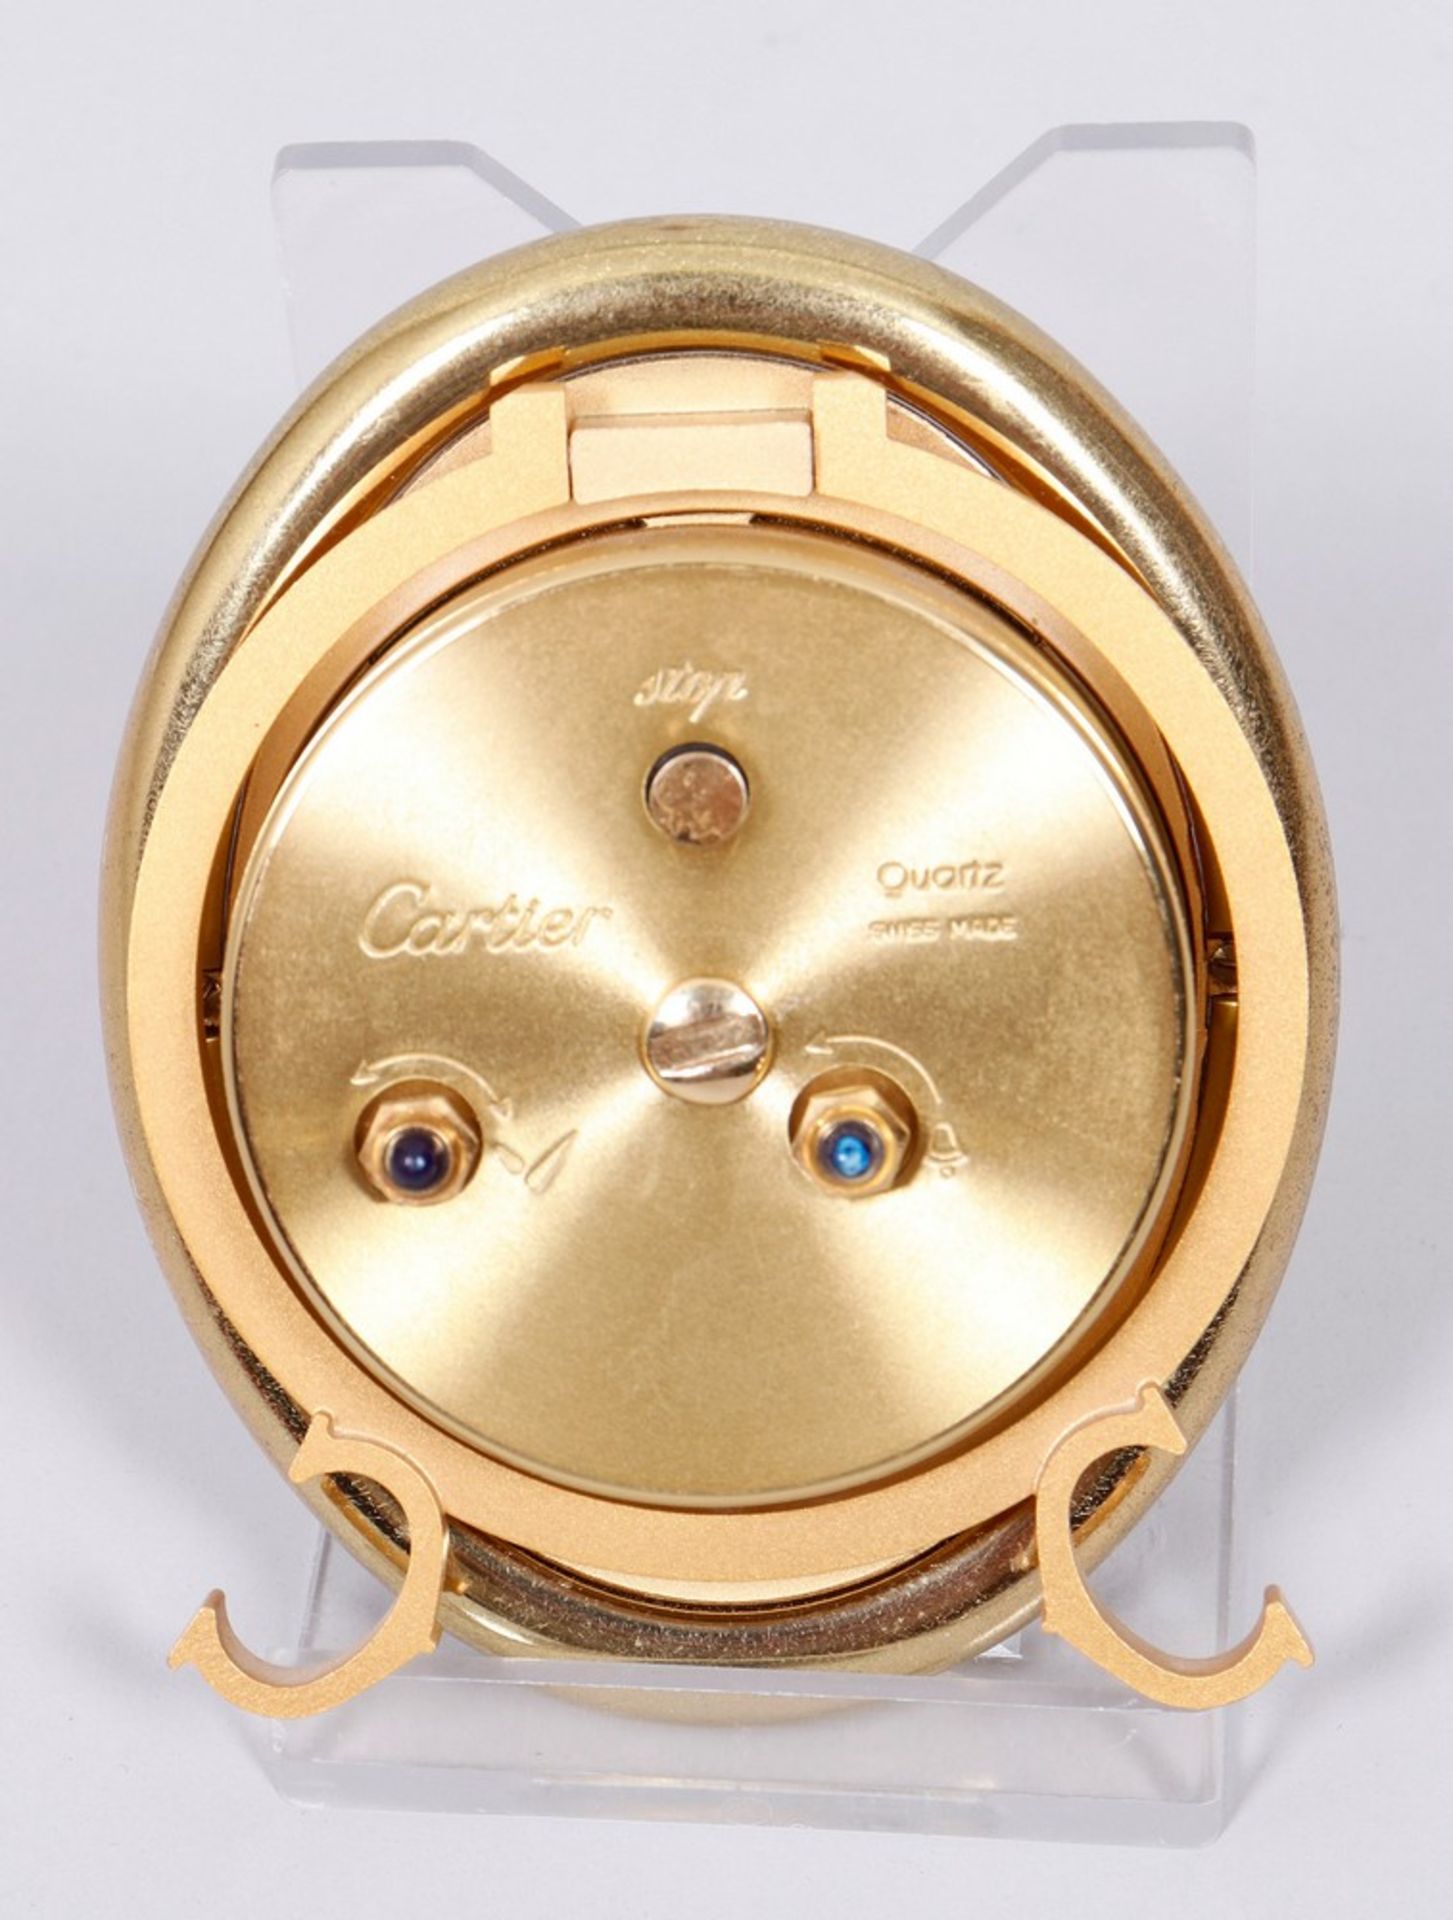 Table alarm clock, Cartier, 20th C. - Image 4 of 4